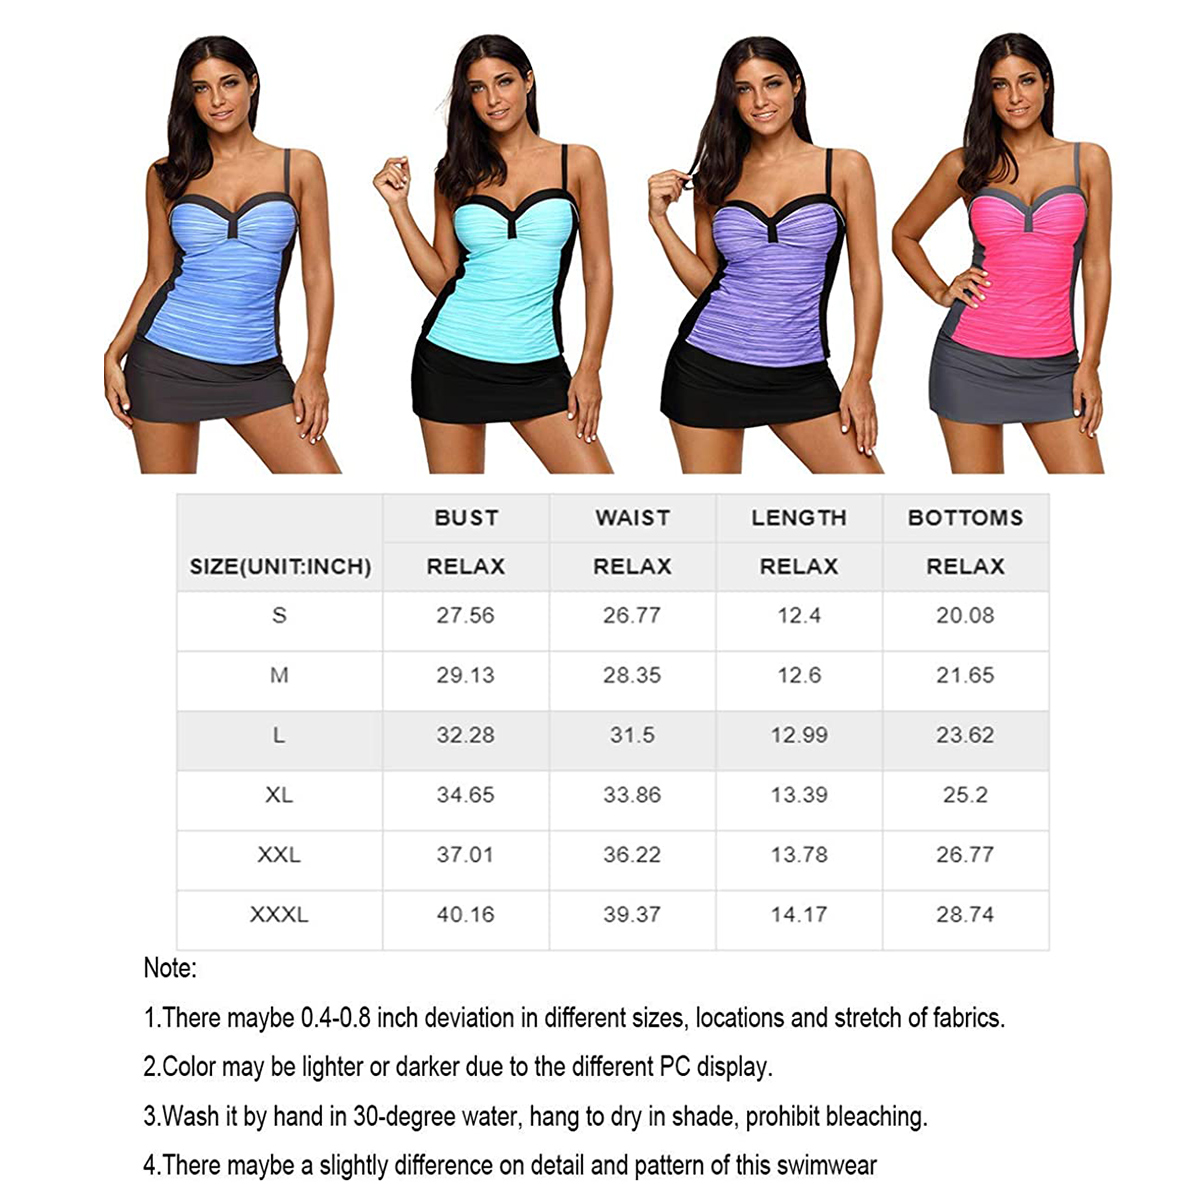 HAWEE Plus Size Swimdress Bathing Swimsuits for Women Tankini Tops with Boyshorts Two Piece Bathing Suits S-2XL - image 2 of 3